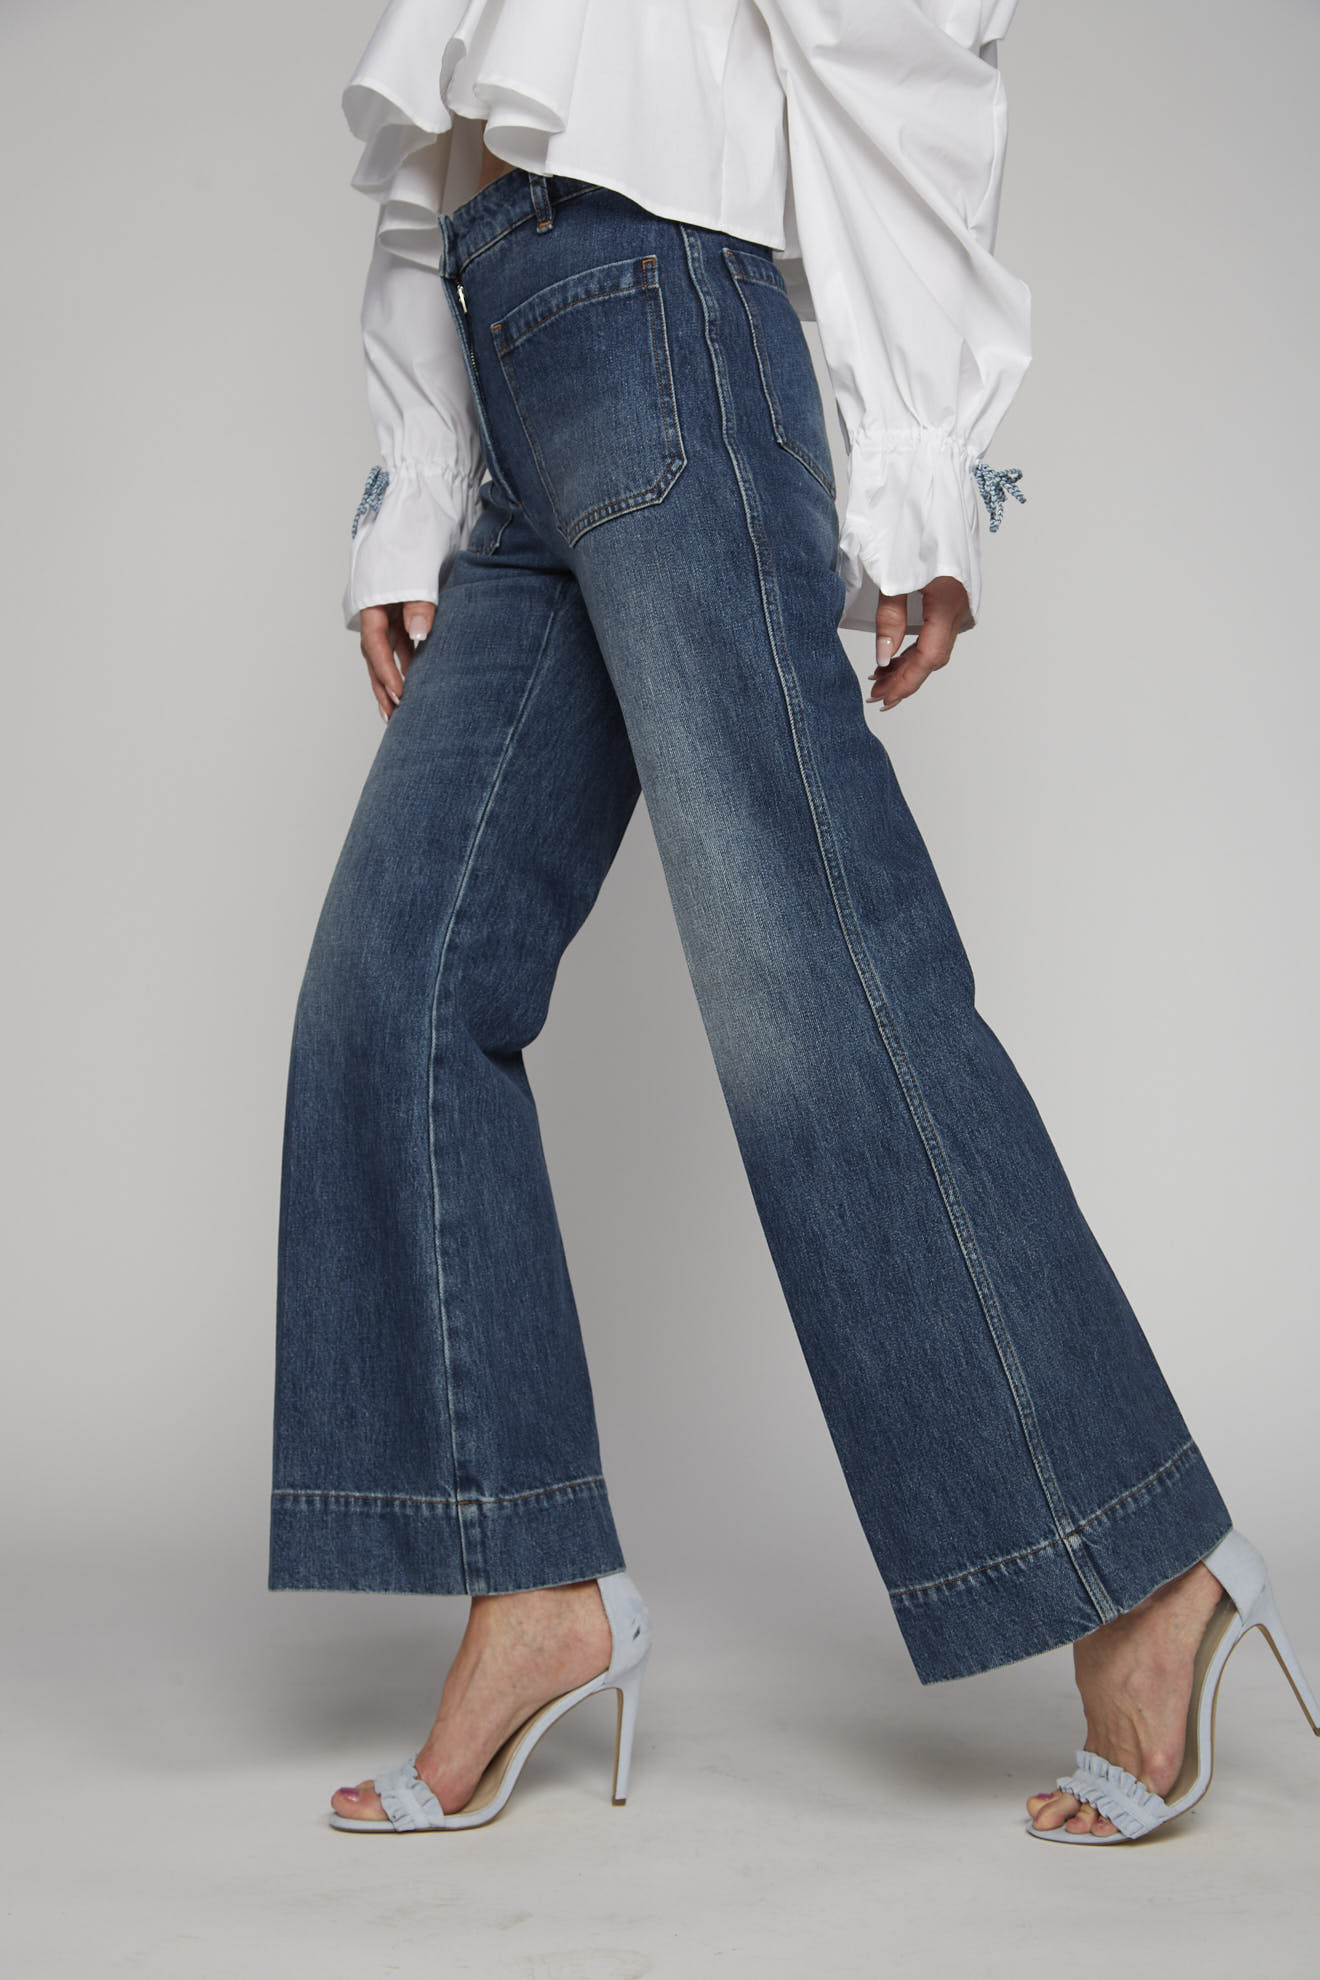 victoria beckham alina jeans,Up To OFF 76%